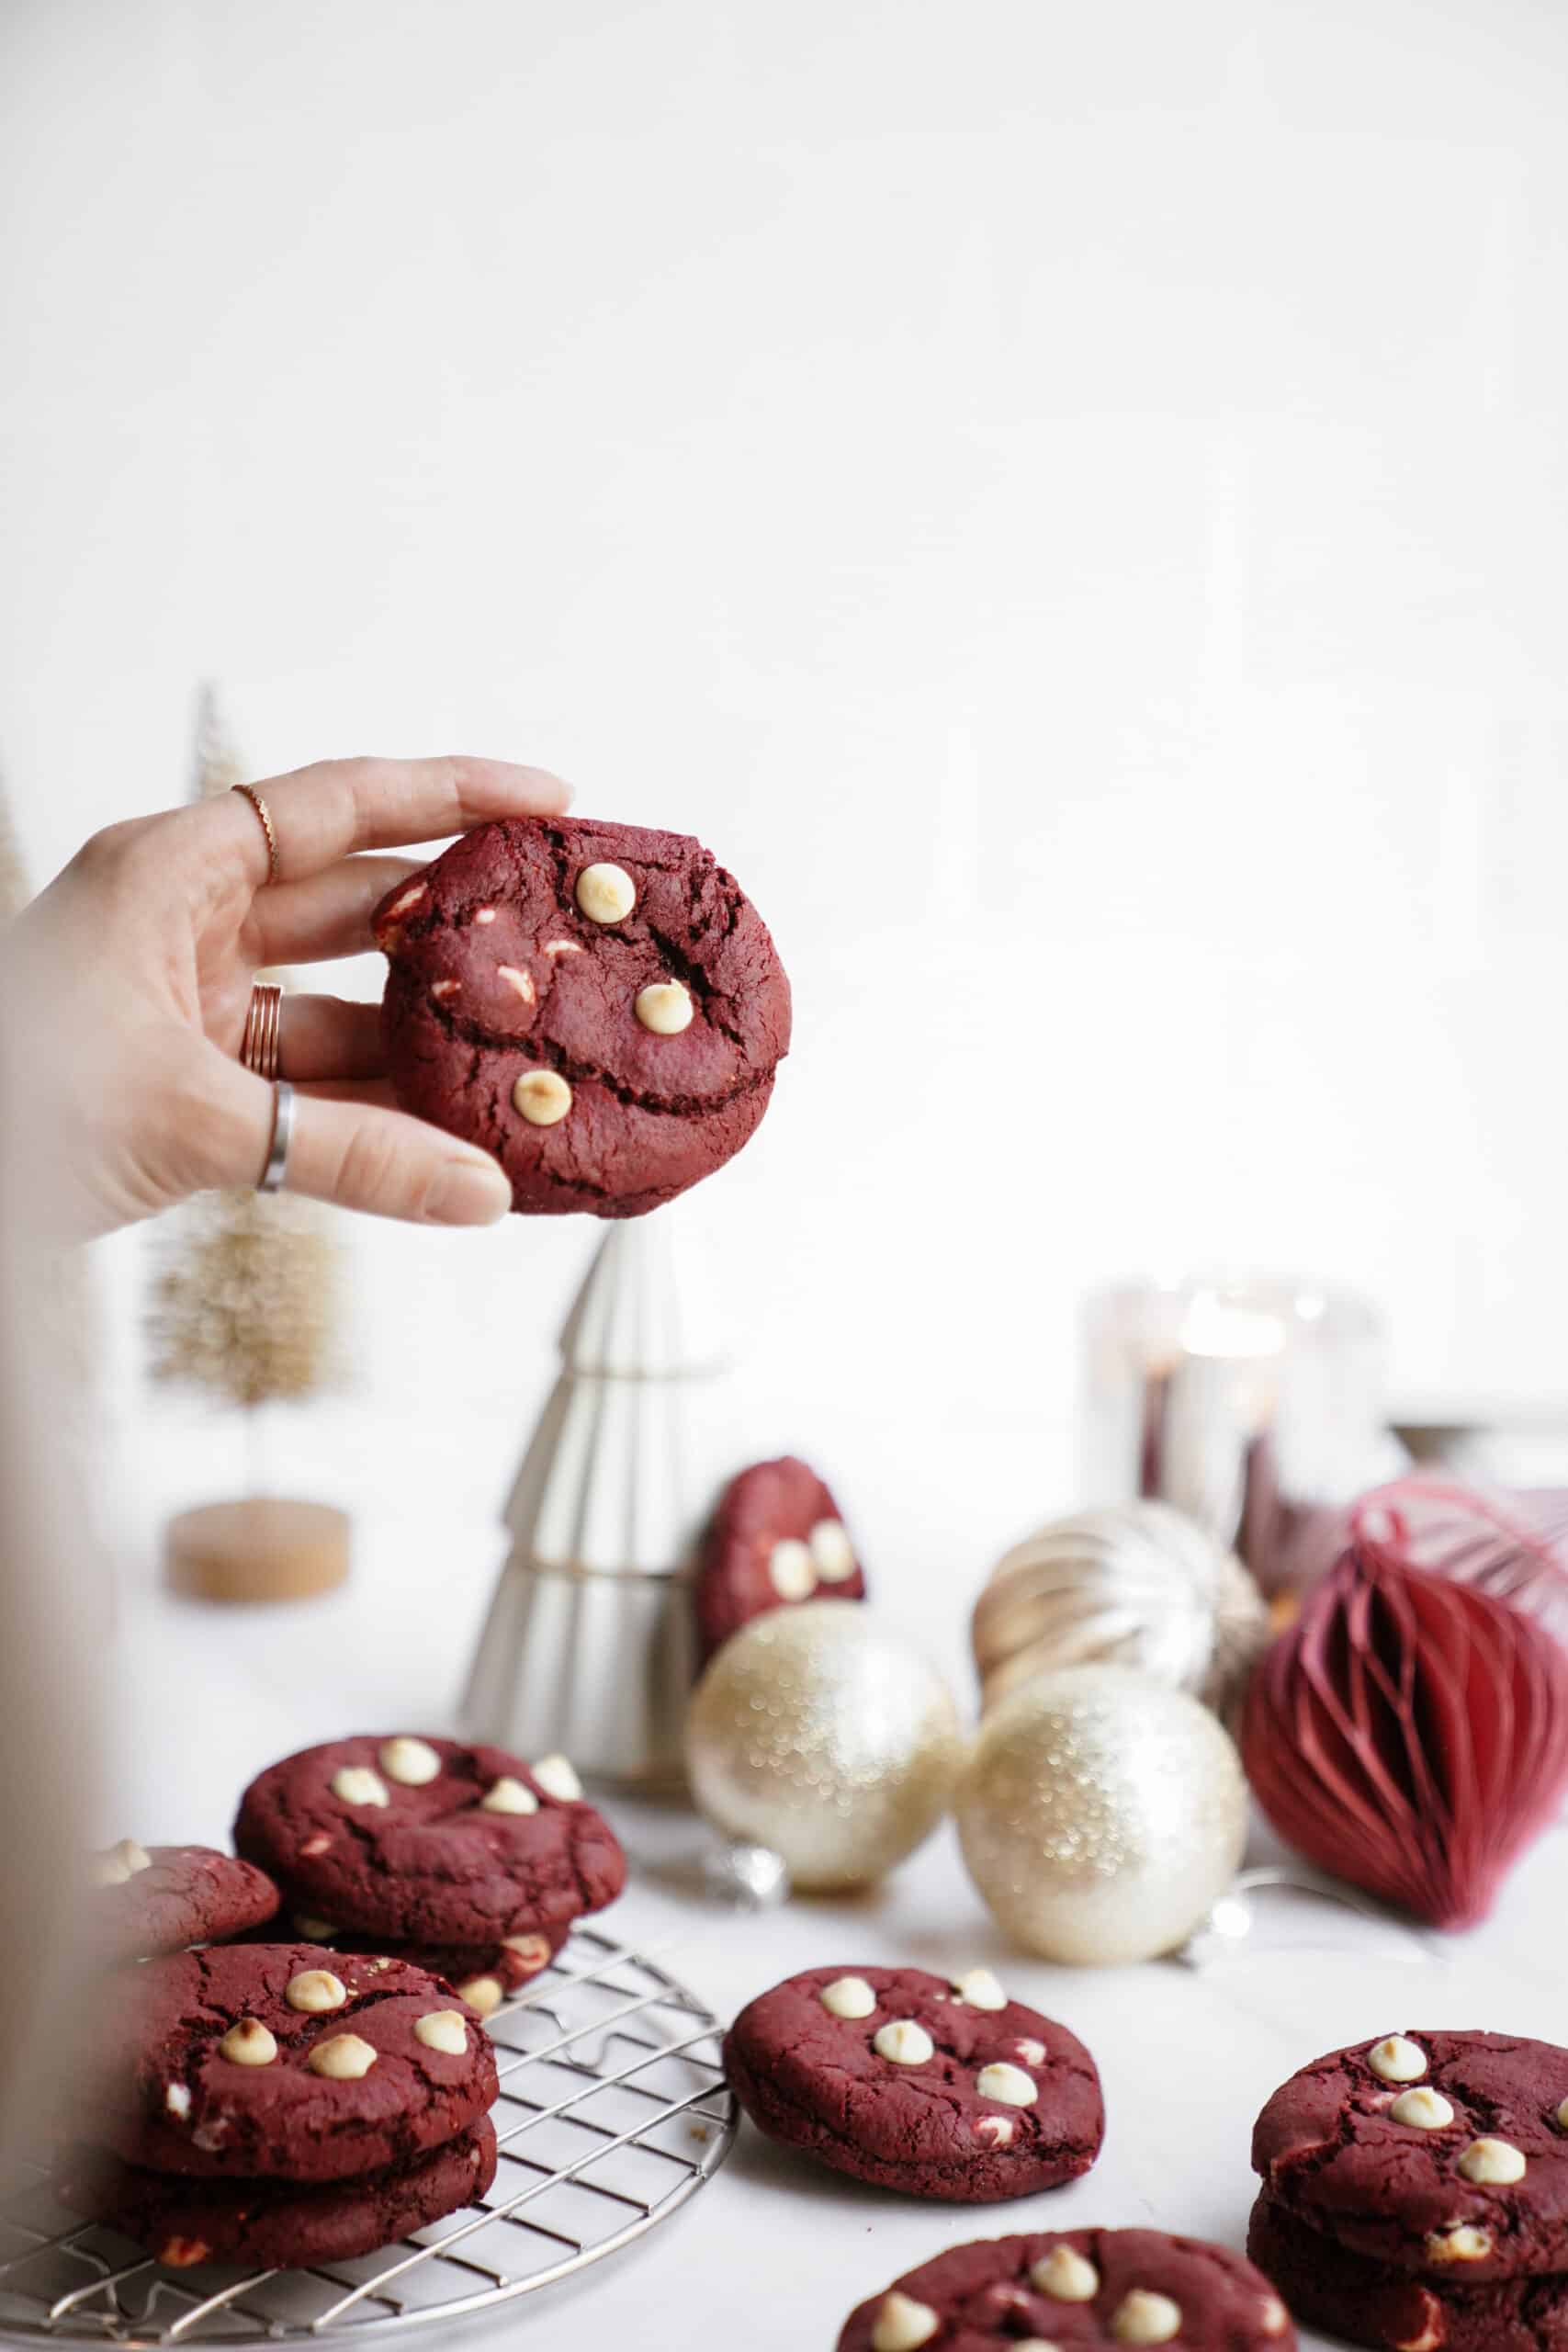 A hand picking up a red velvet cookie from a countertop